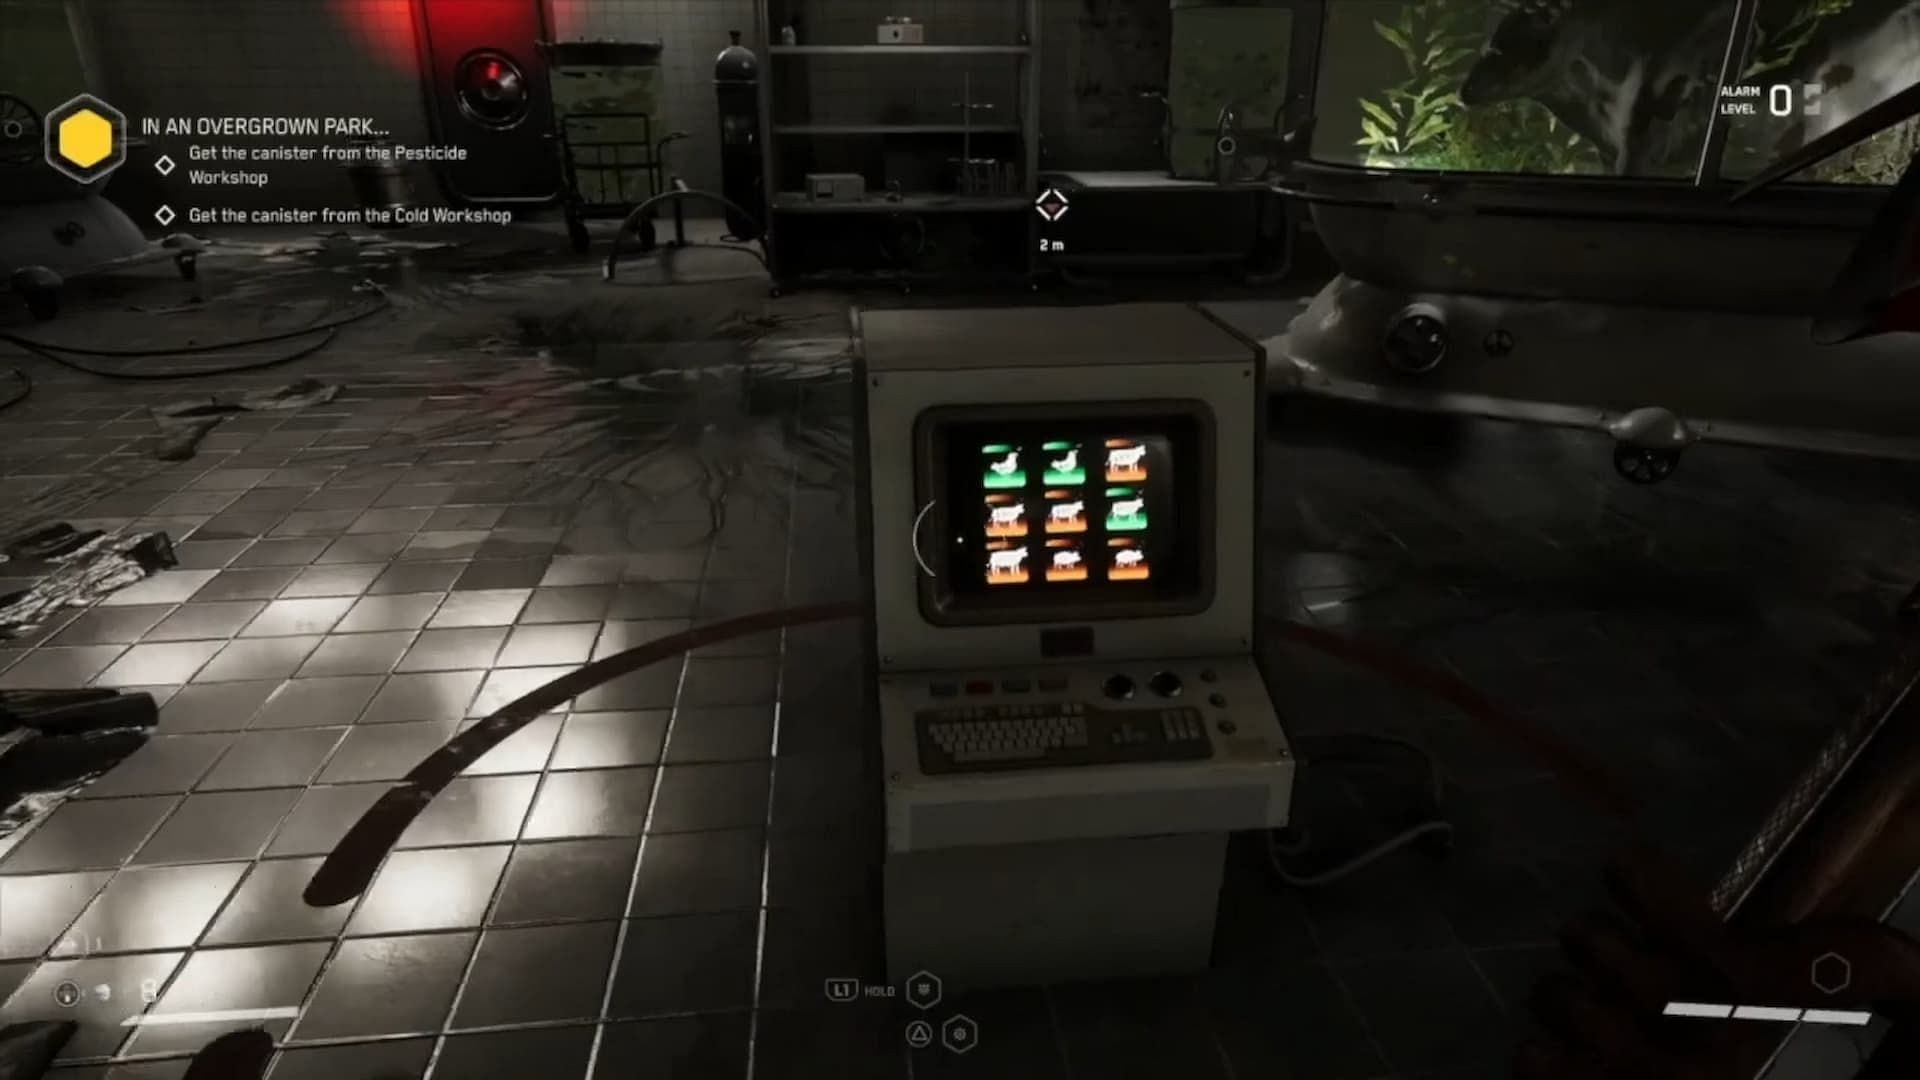 Turn all the animal cards green to solve the puzzle in Atomic Heart (Image via YouTube Channel Trophygamers)